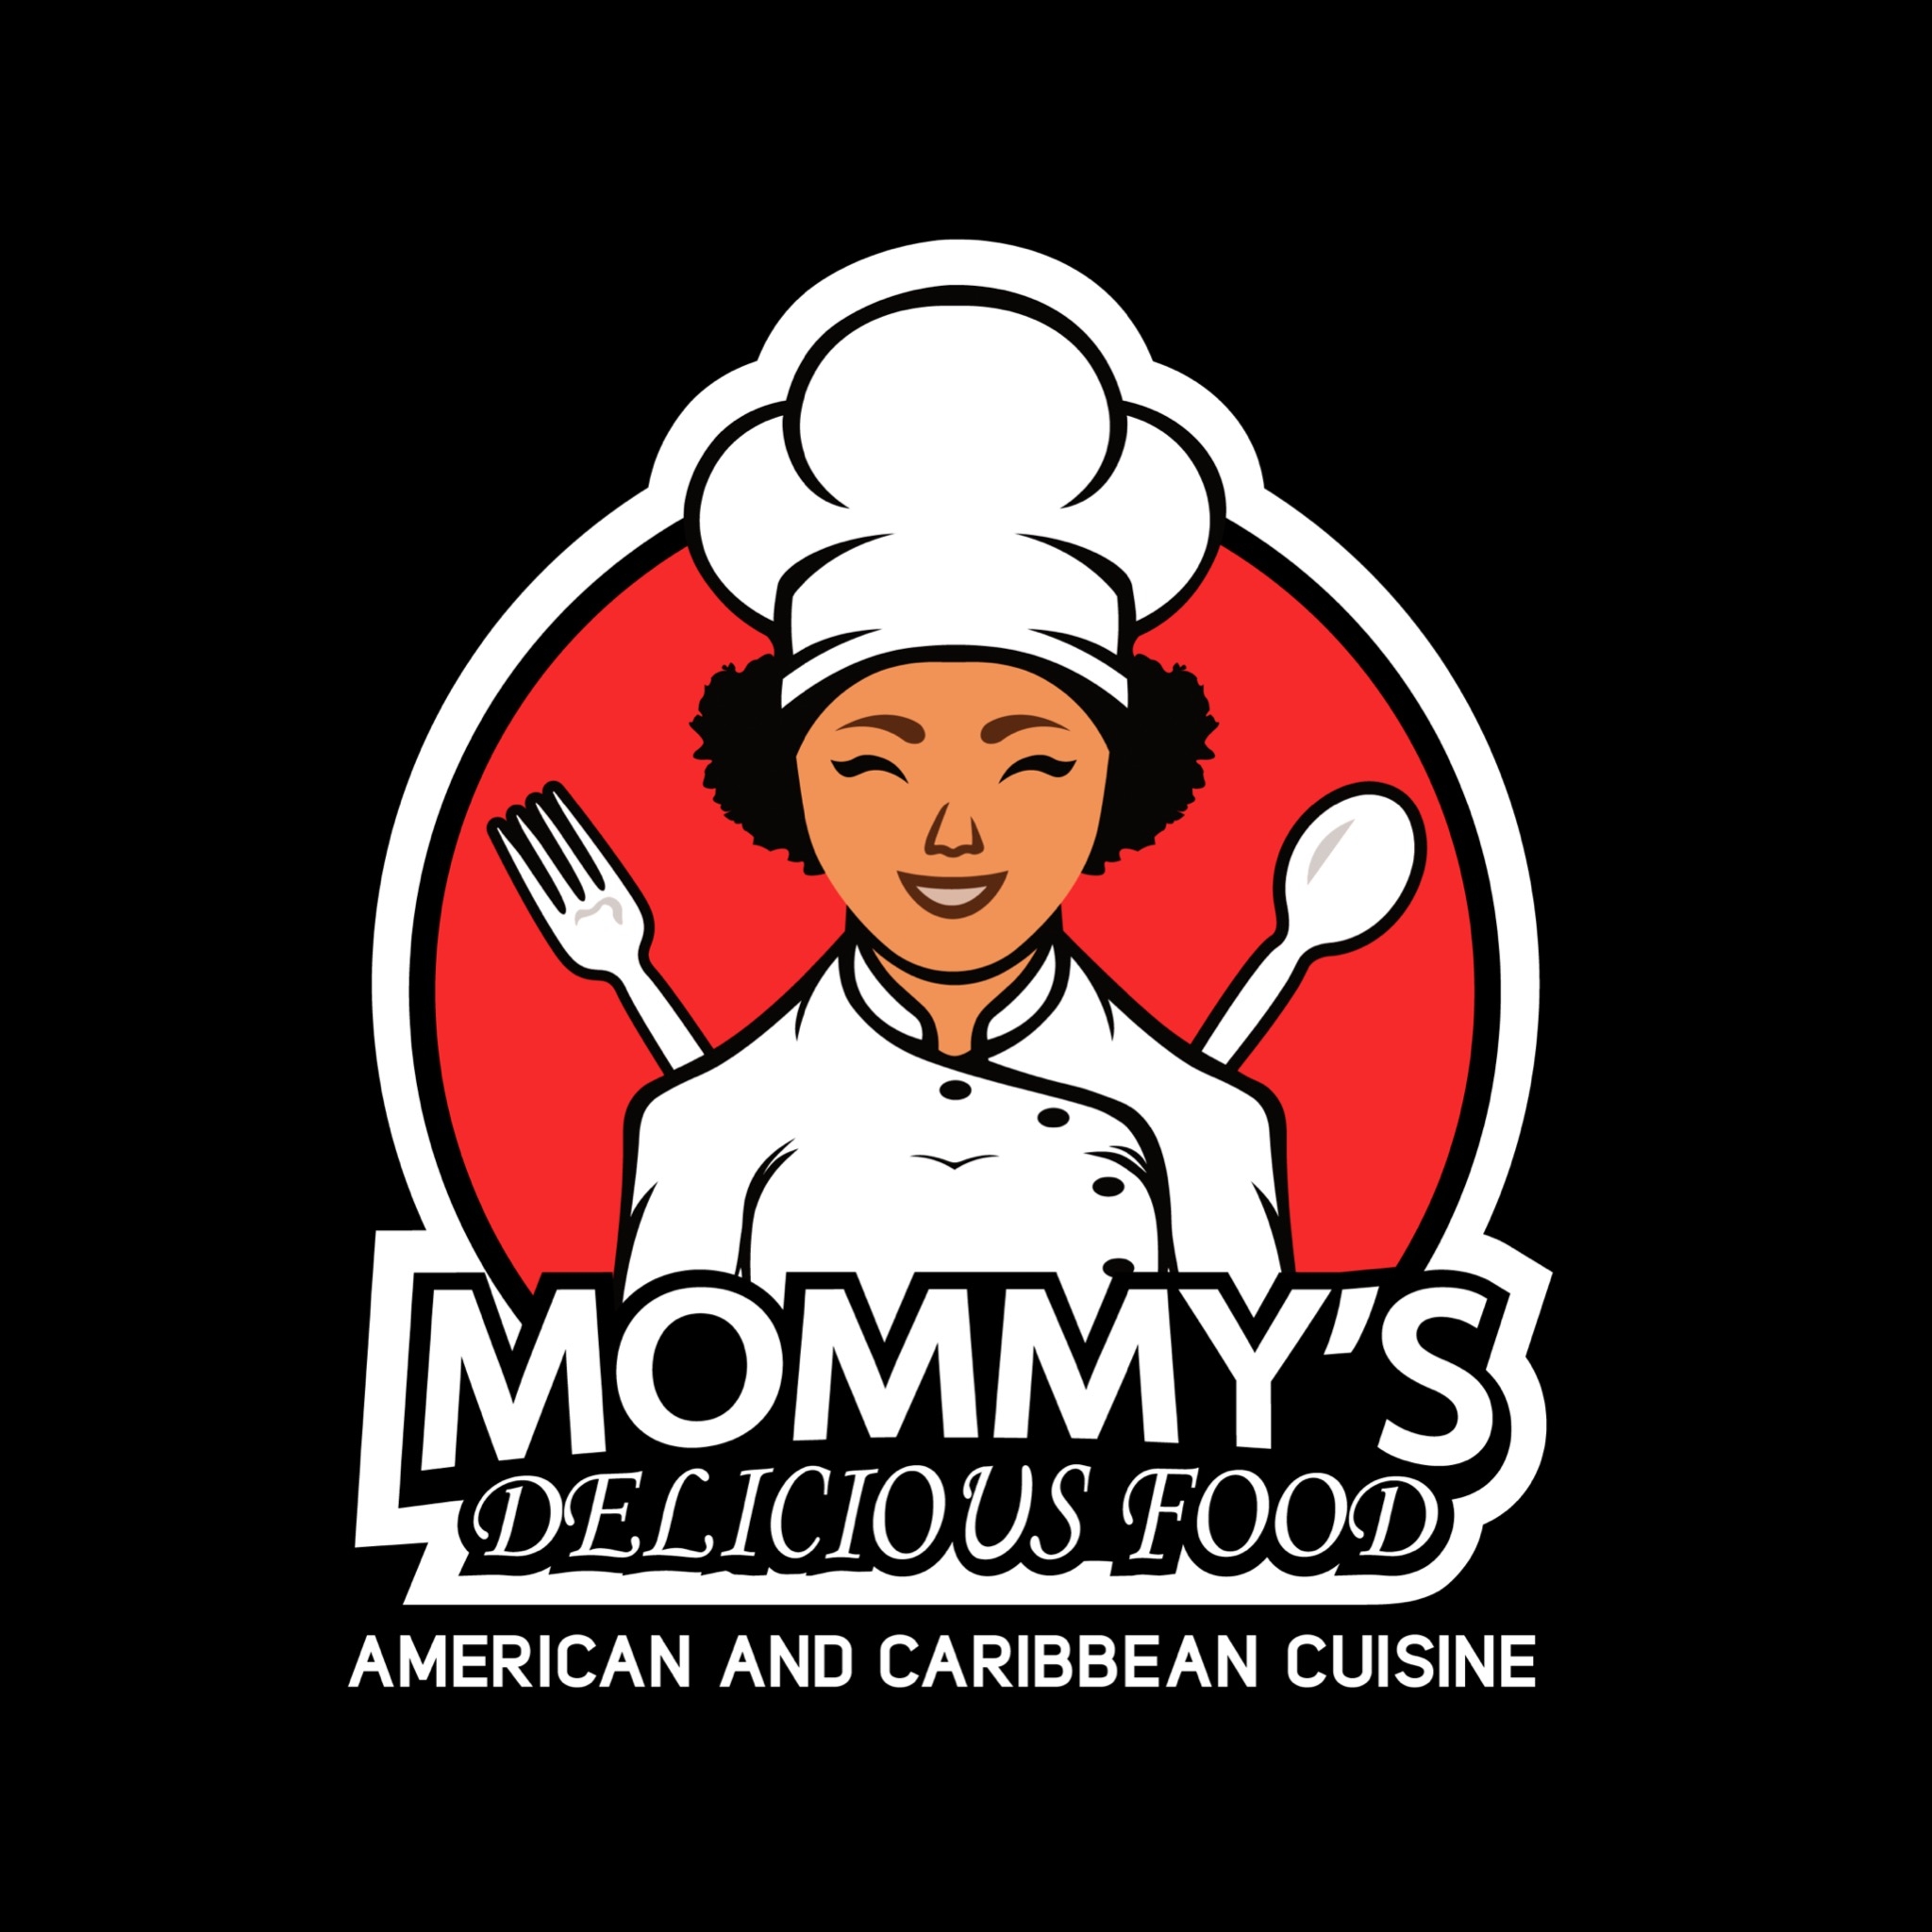 Mommy's Delicious Food